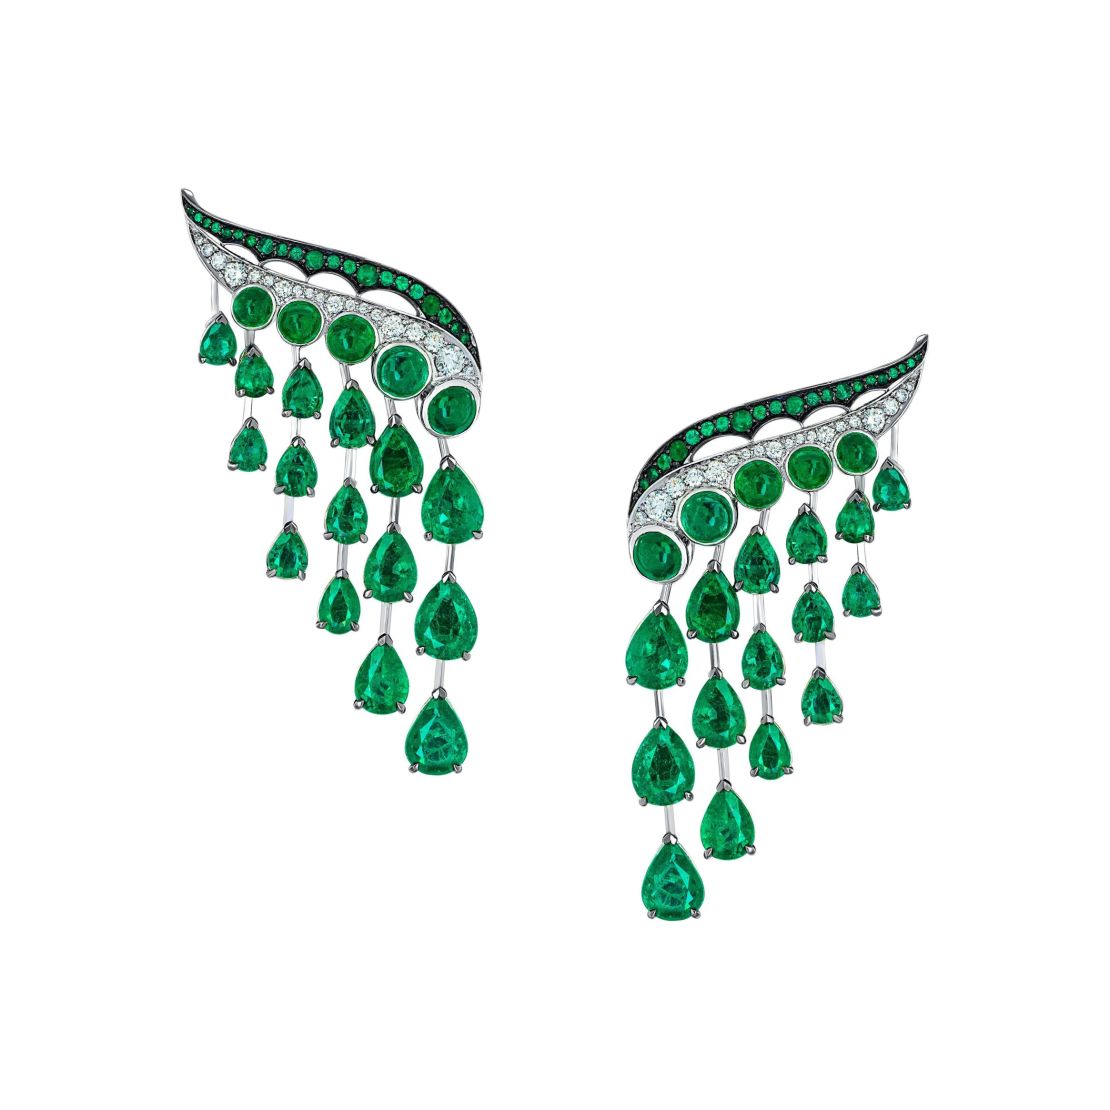 Emerald earrings from Vania Leles' Legends of Africa collection 